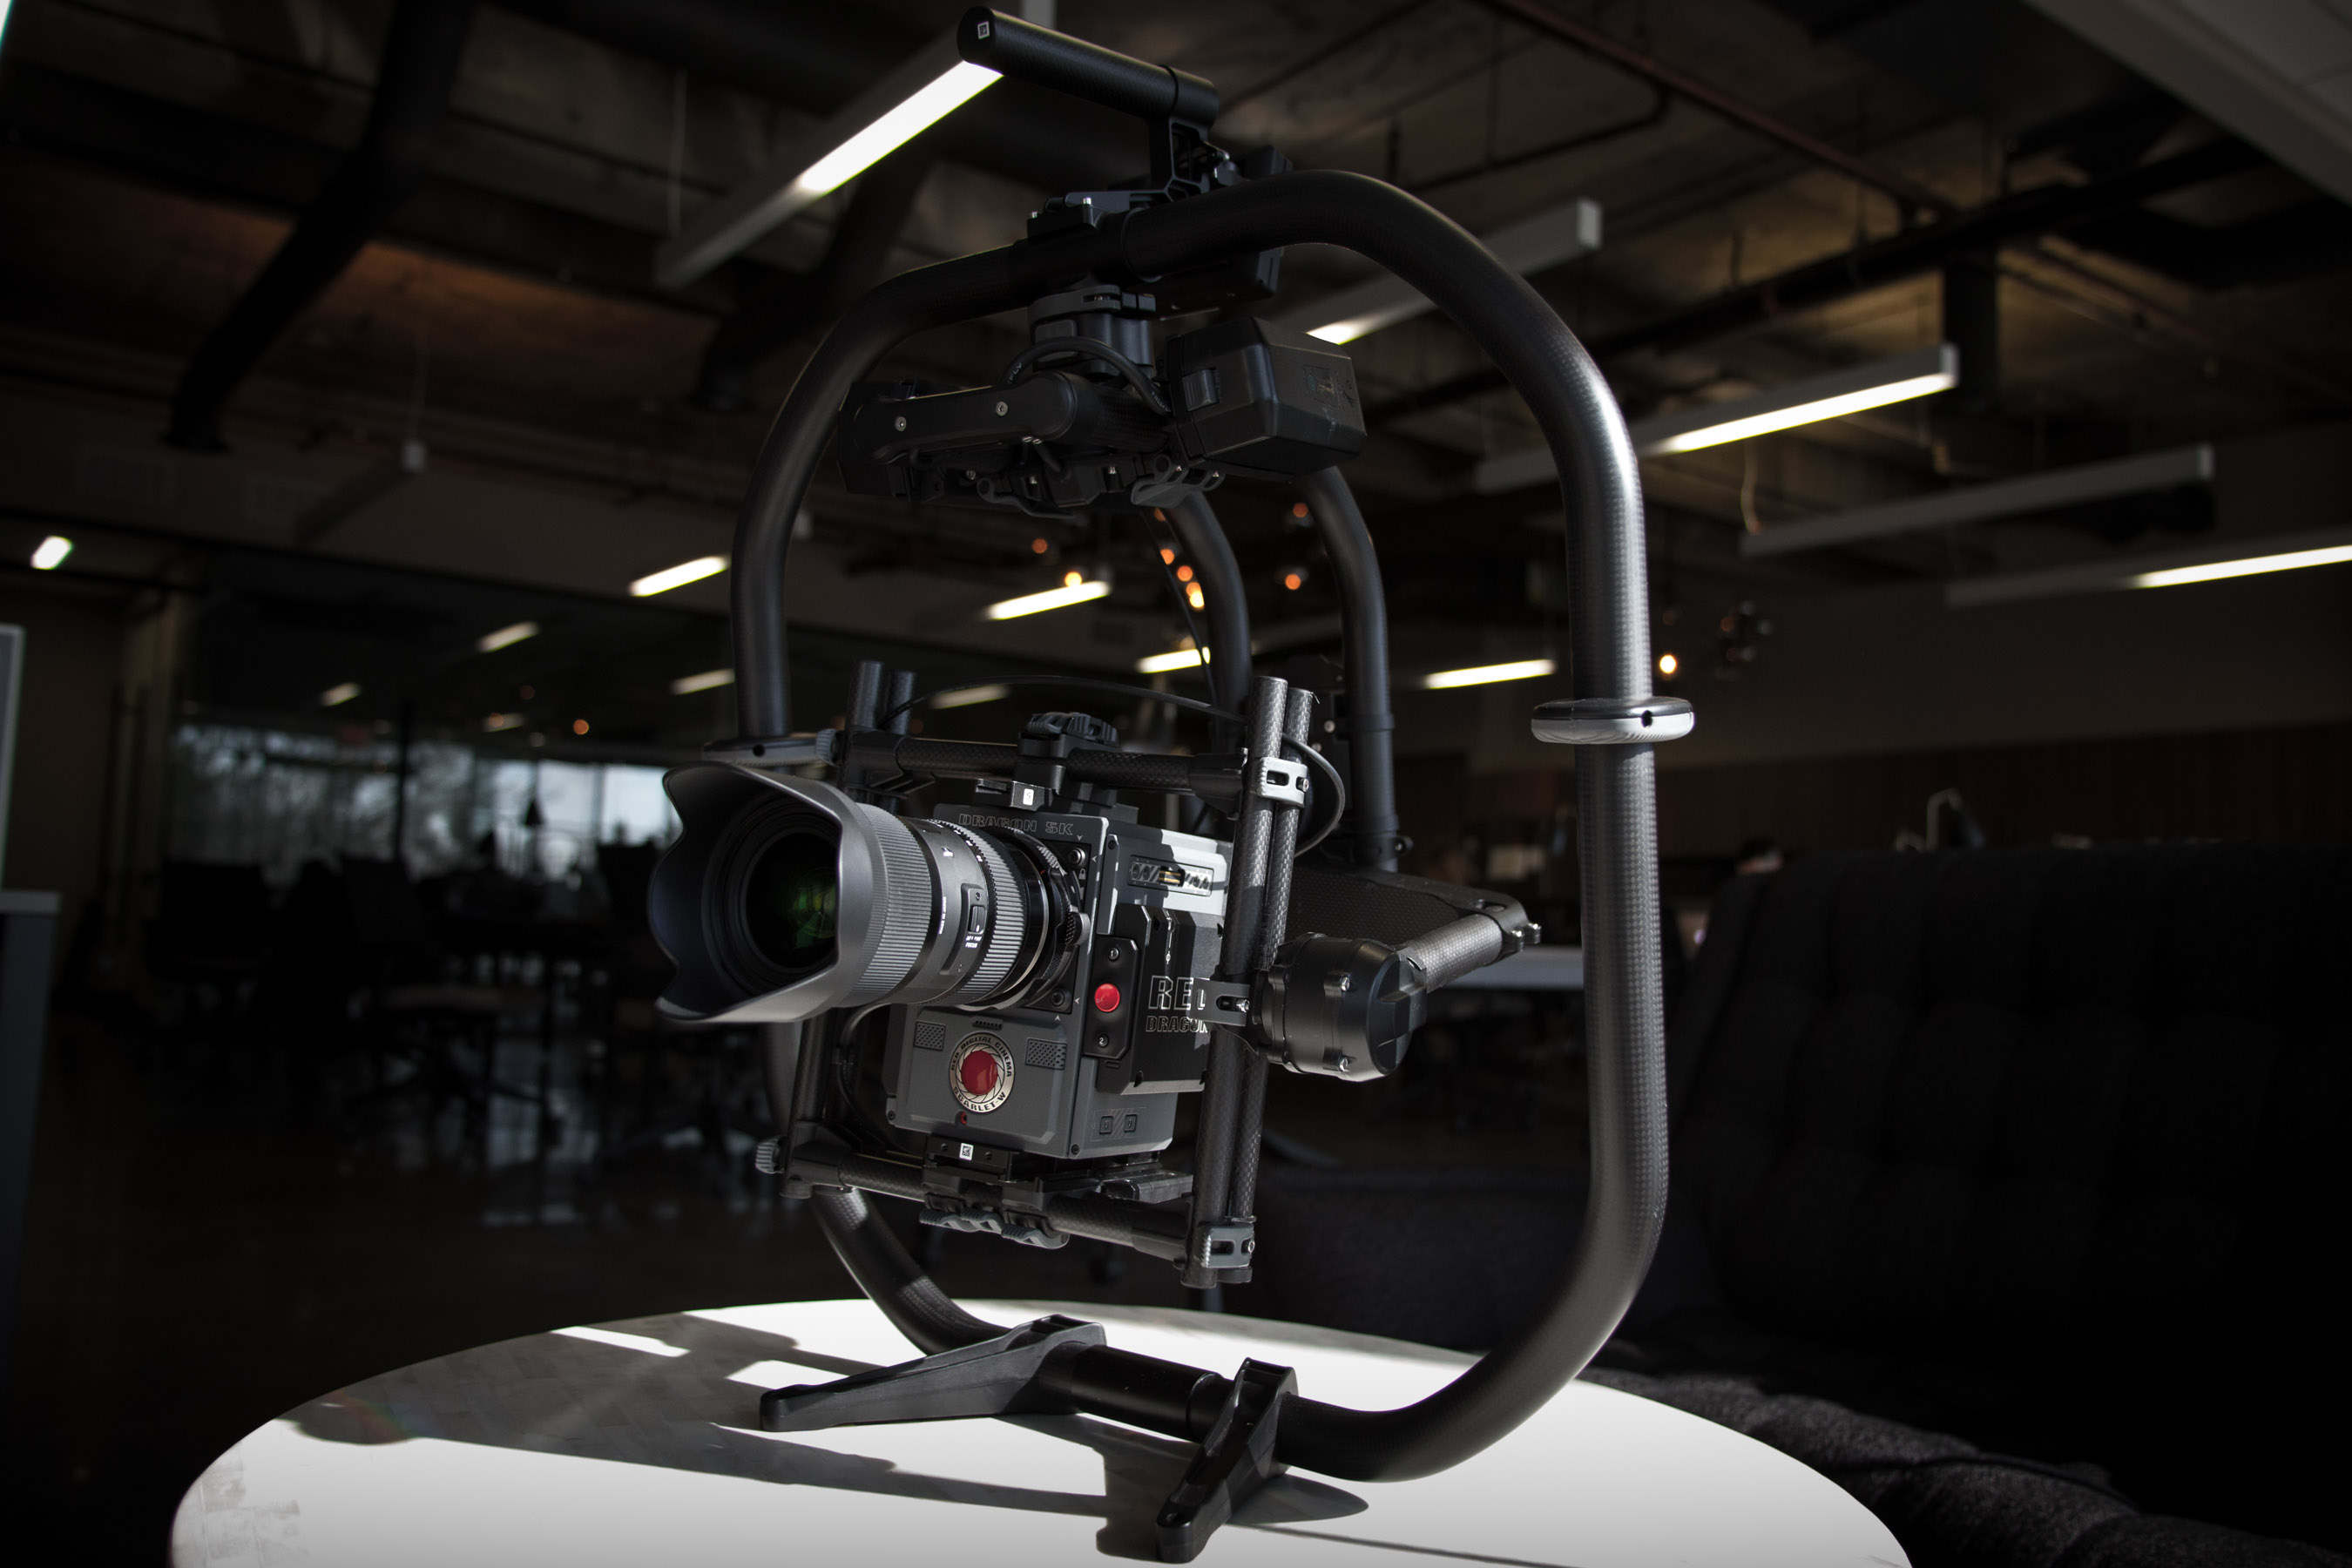 Red Digital Cinema Camera on Movi Pro at Video Production Company Office